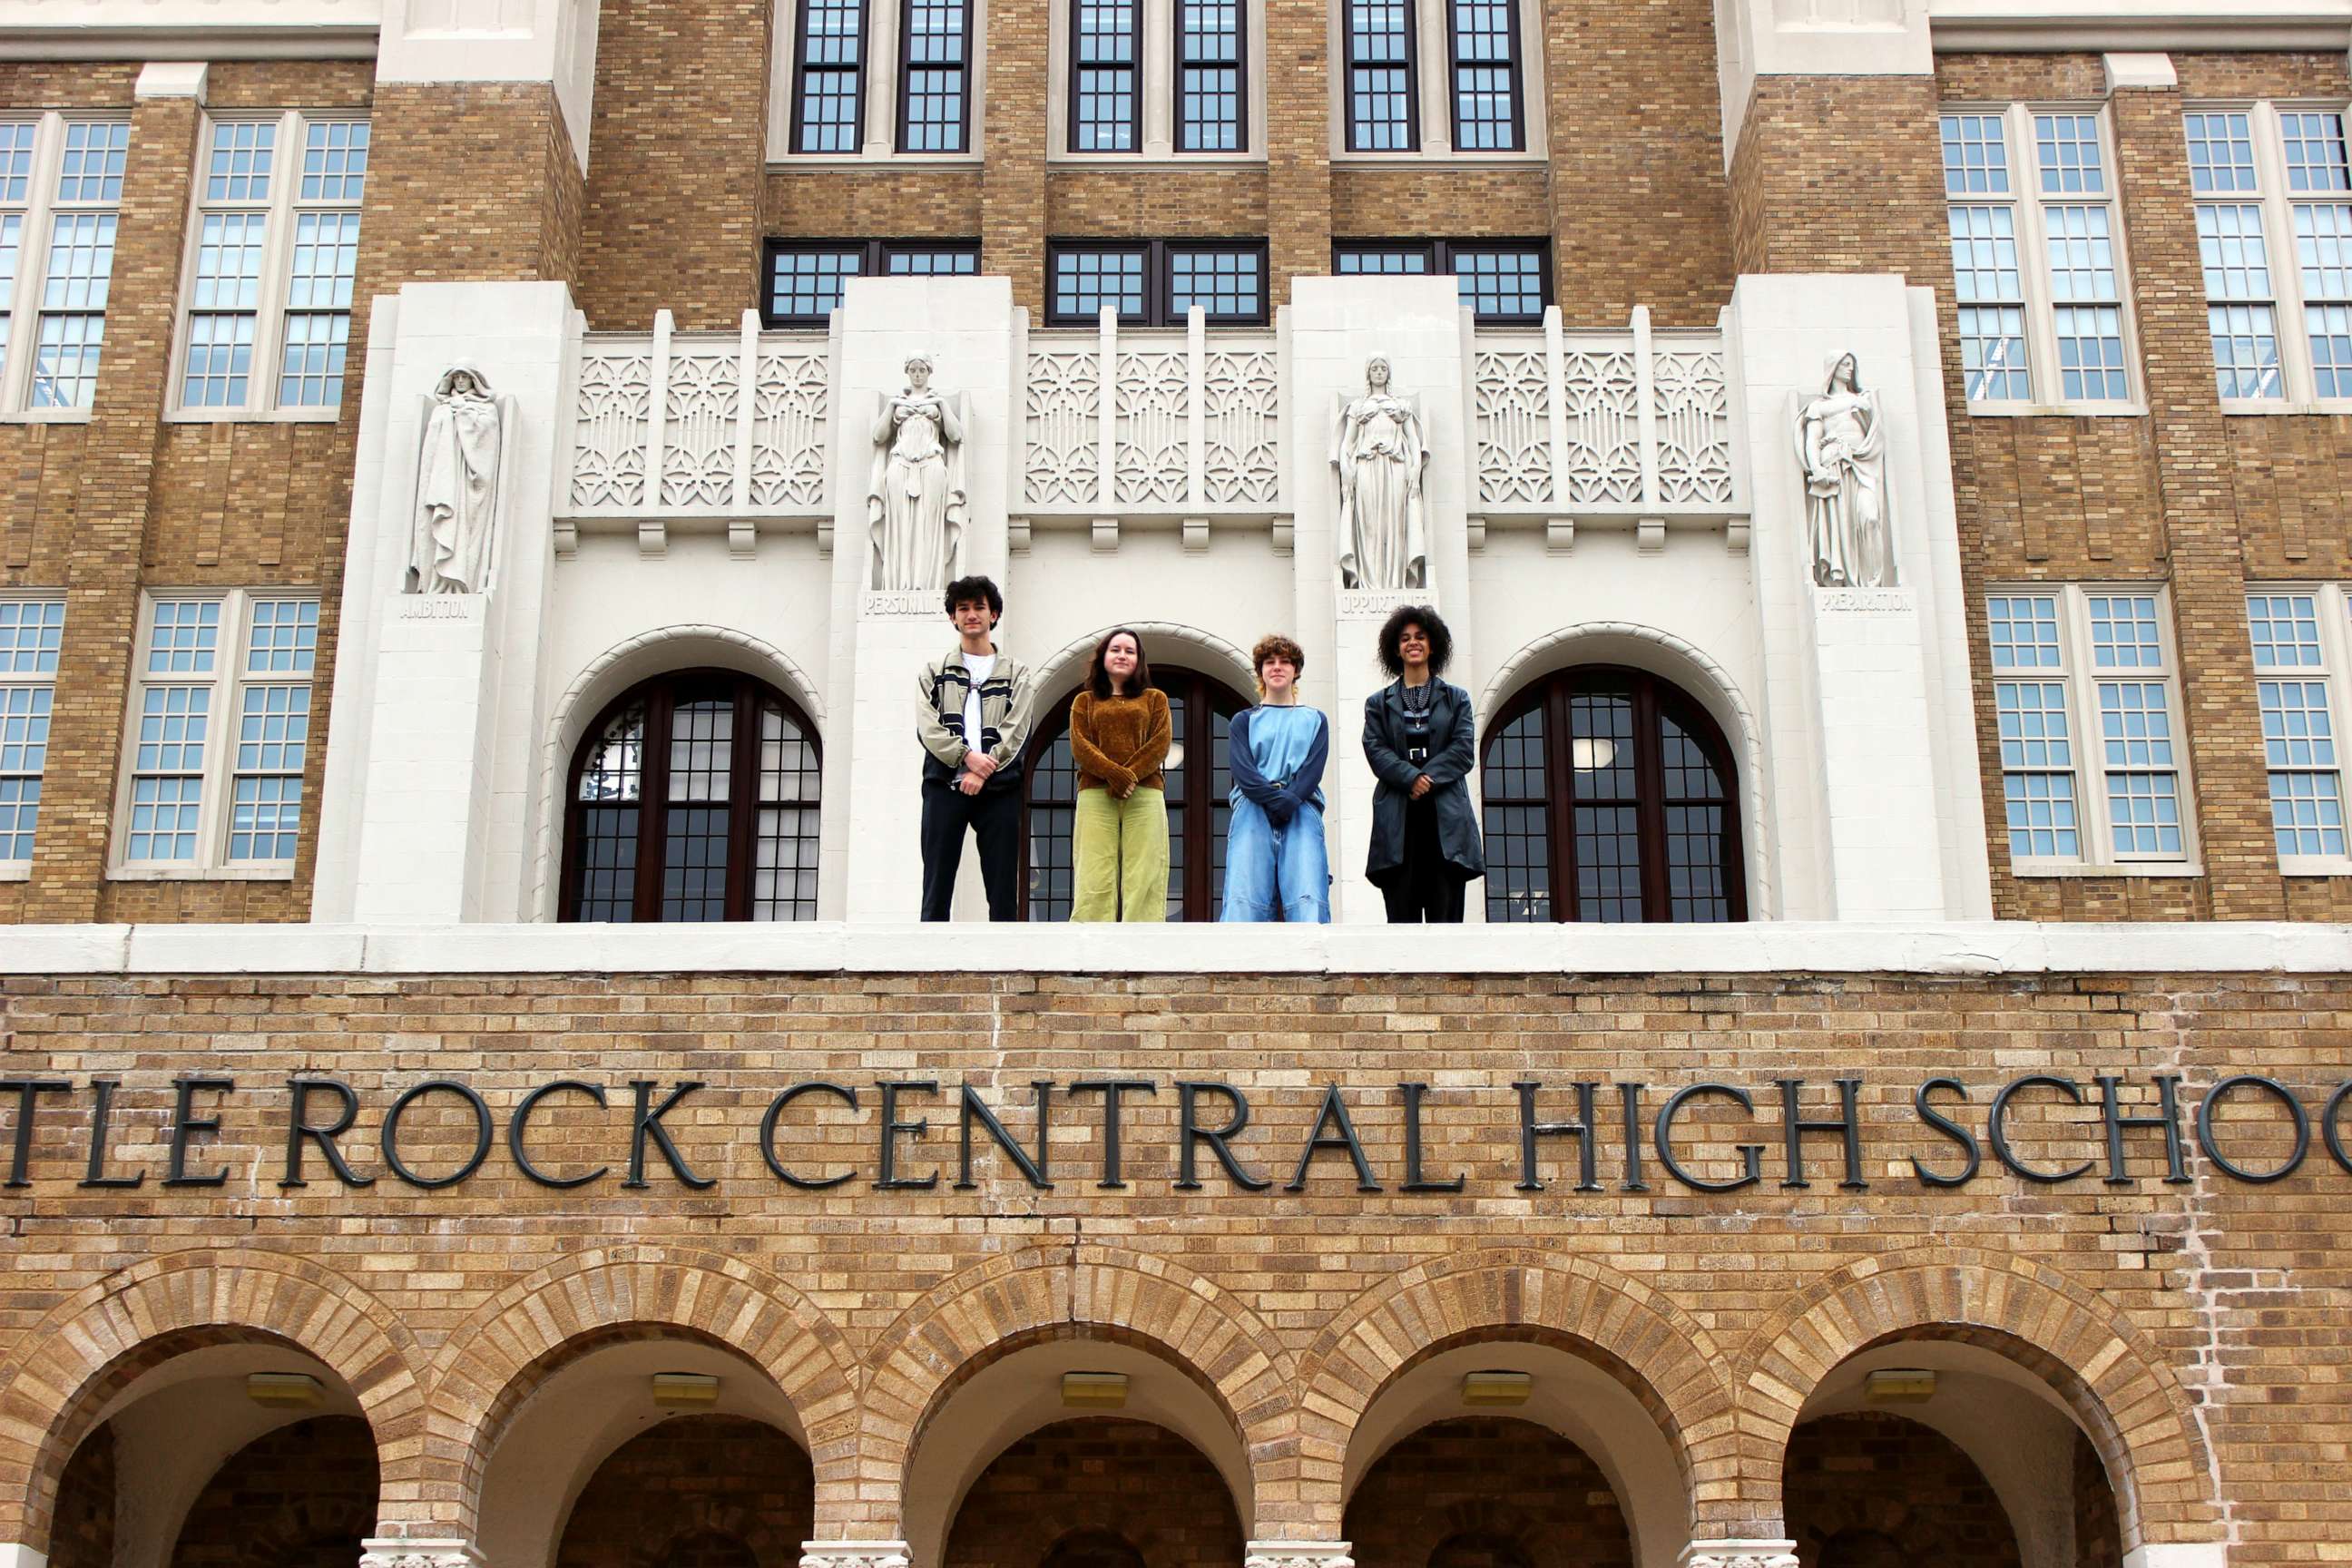 PHOTO: Students Ernest Quirk, Gryffyn May, Bekah Jackson and Addison McCuien at Little Rock Central High School on Thursday, March 2, 2023.